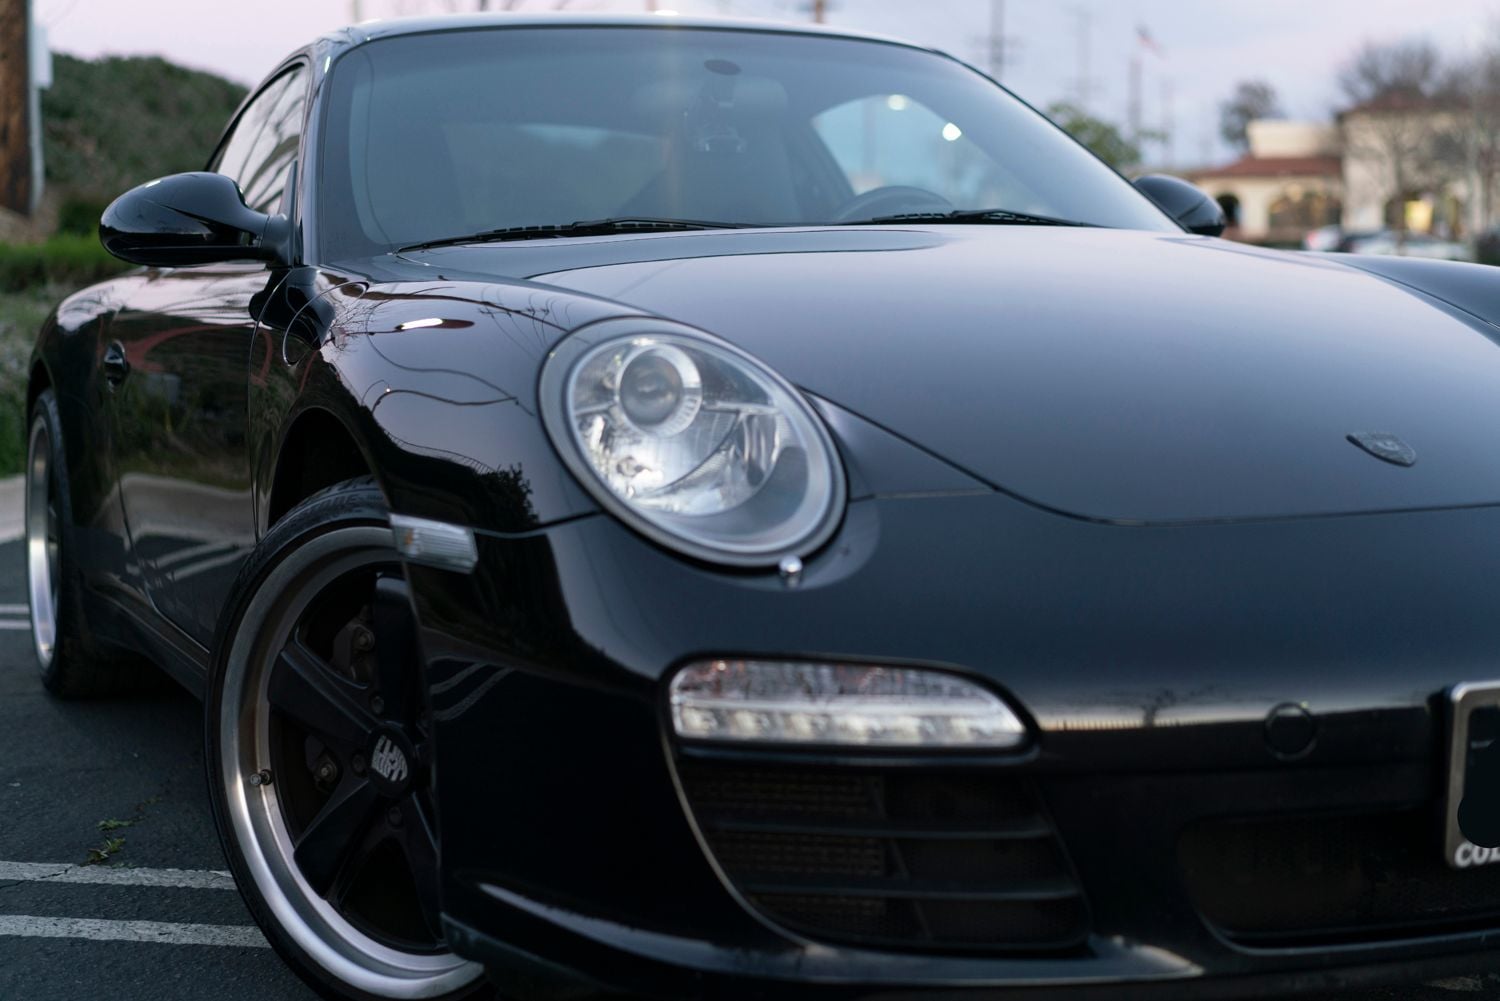 2011 Porsche 911 - 2011 Porsche 911 C2 997.2 6 Speed Manual - Used - VIN WP0AA2A99BS706420 - 88,400 Miles - 6 cyl - 2WD - Manual - Coupe - Black - Agoura Hills, CA 91301, United States